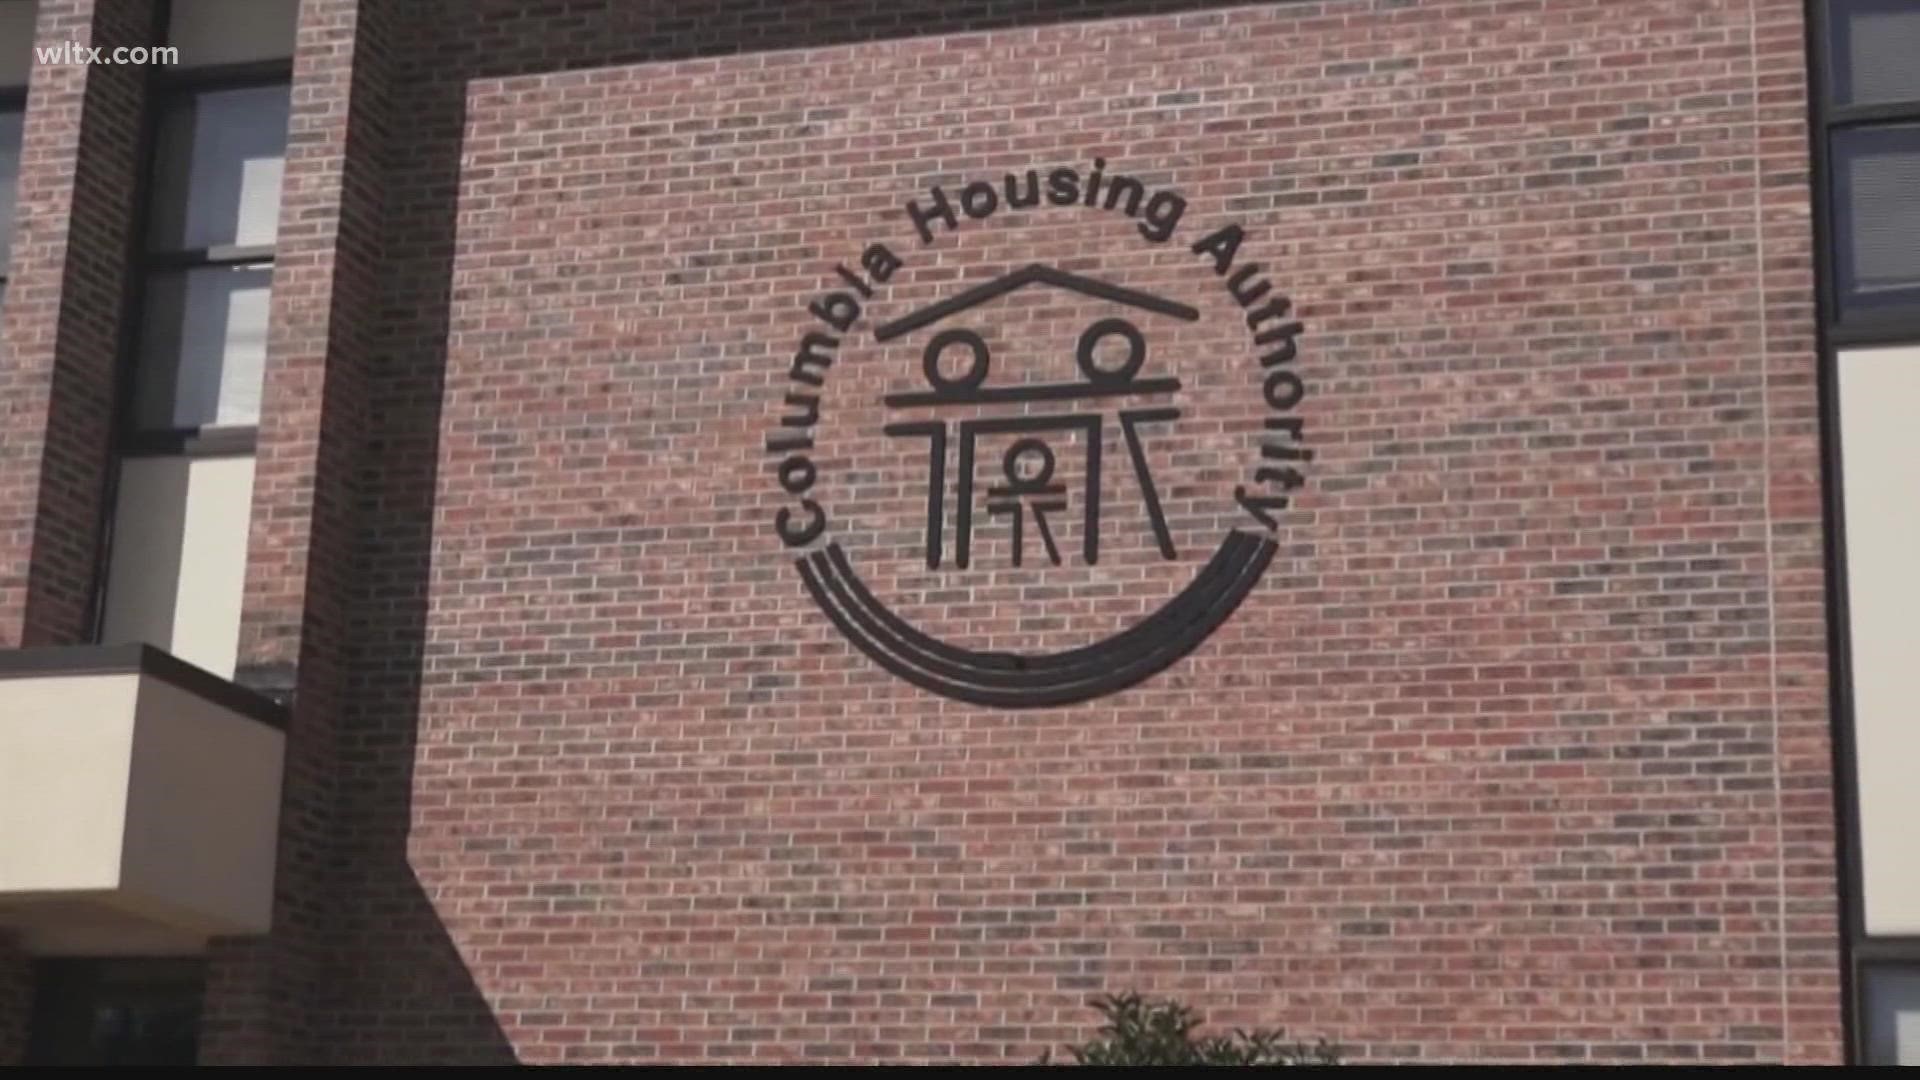 The Columbia Housing Authority met Thursday to discuss several items   including the demolition and renovation of their several properties.